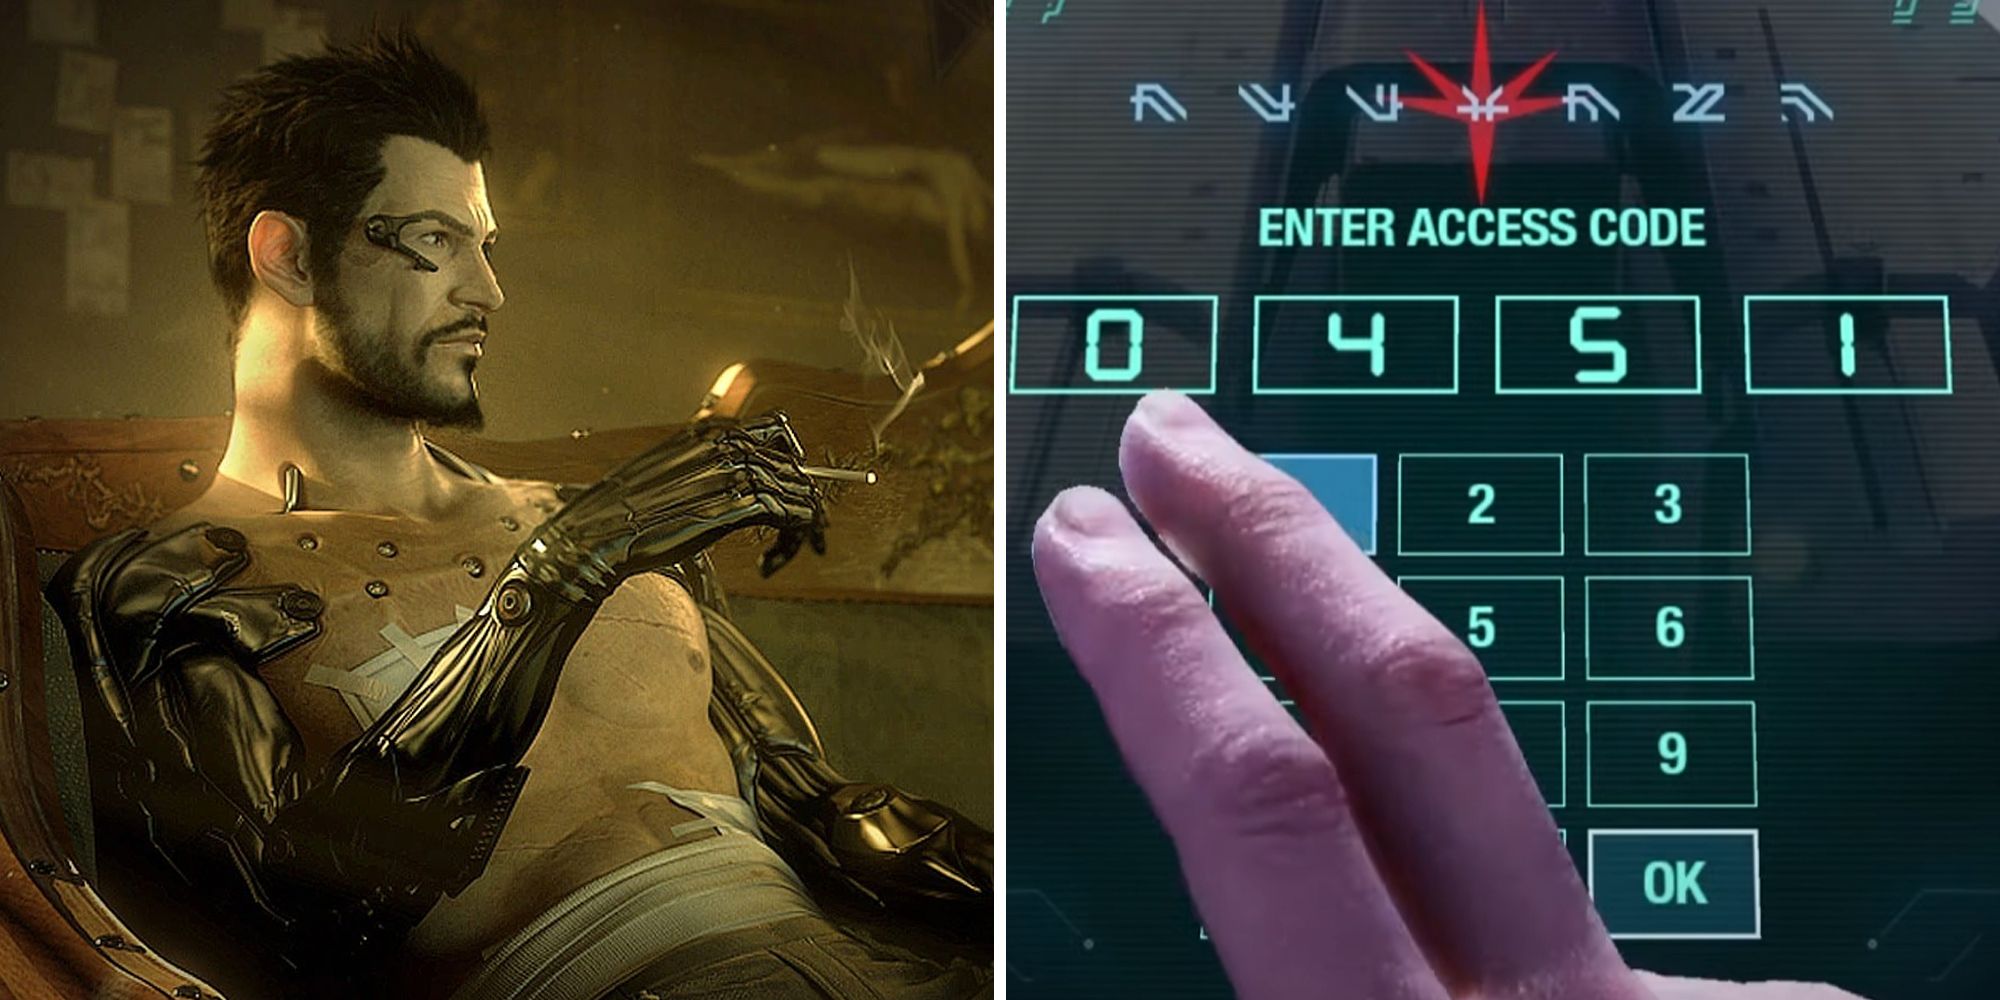 Marvel's Guardians Of The Galaxy. Split Image. Deus Ex on the left and passcode on the right.